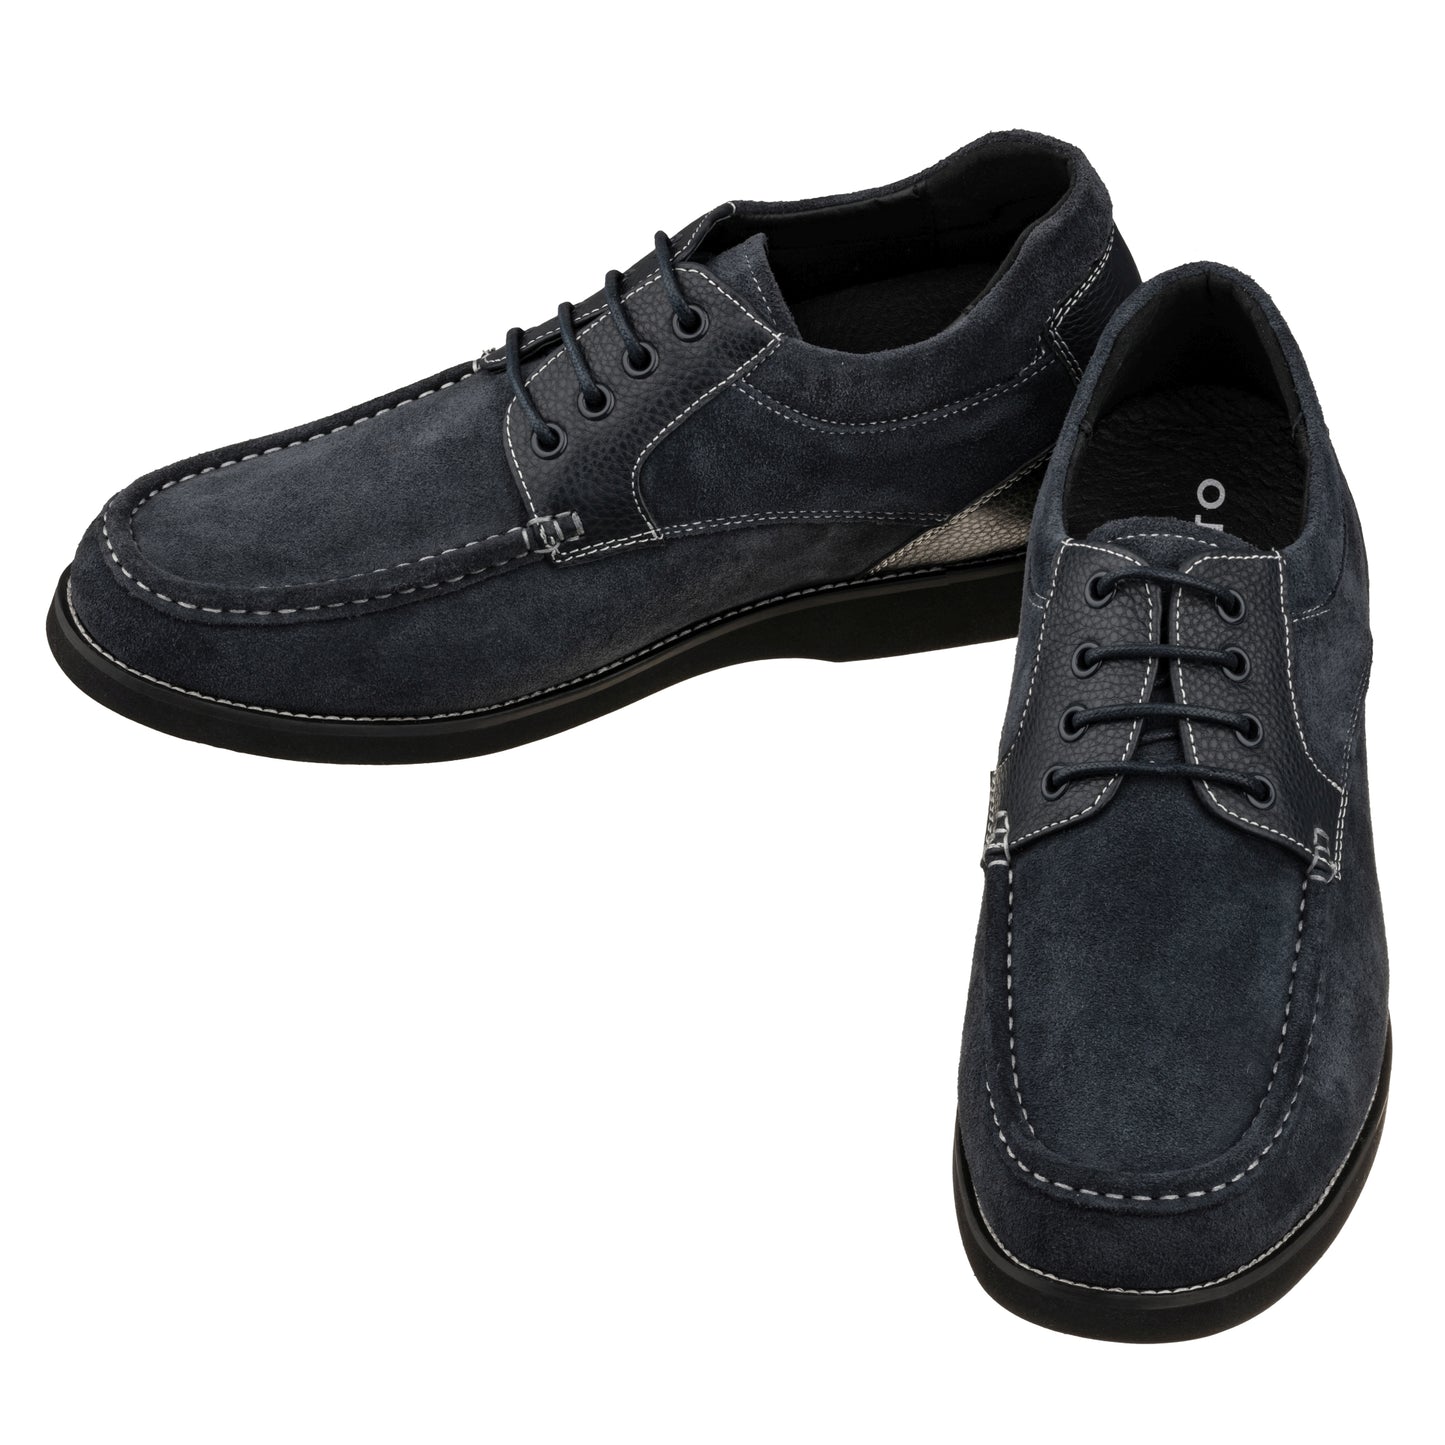 Elevator shoes height increase CALTO - YH9538 - 3.0 Inches (Navy) - Casual Leather Shoes